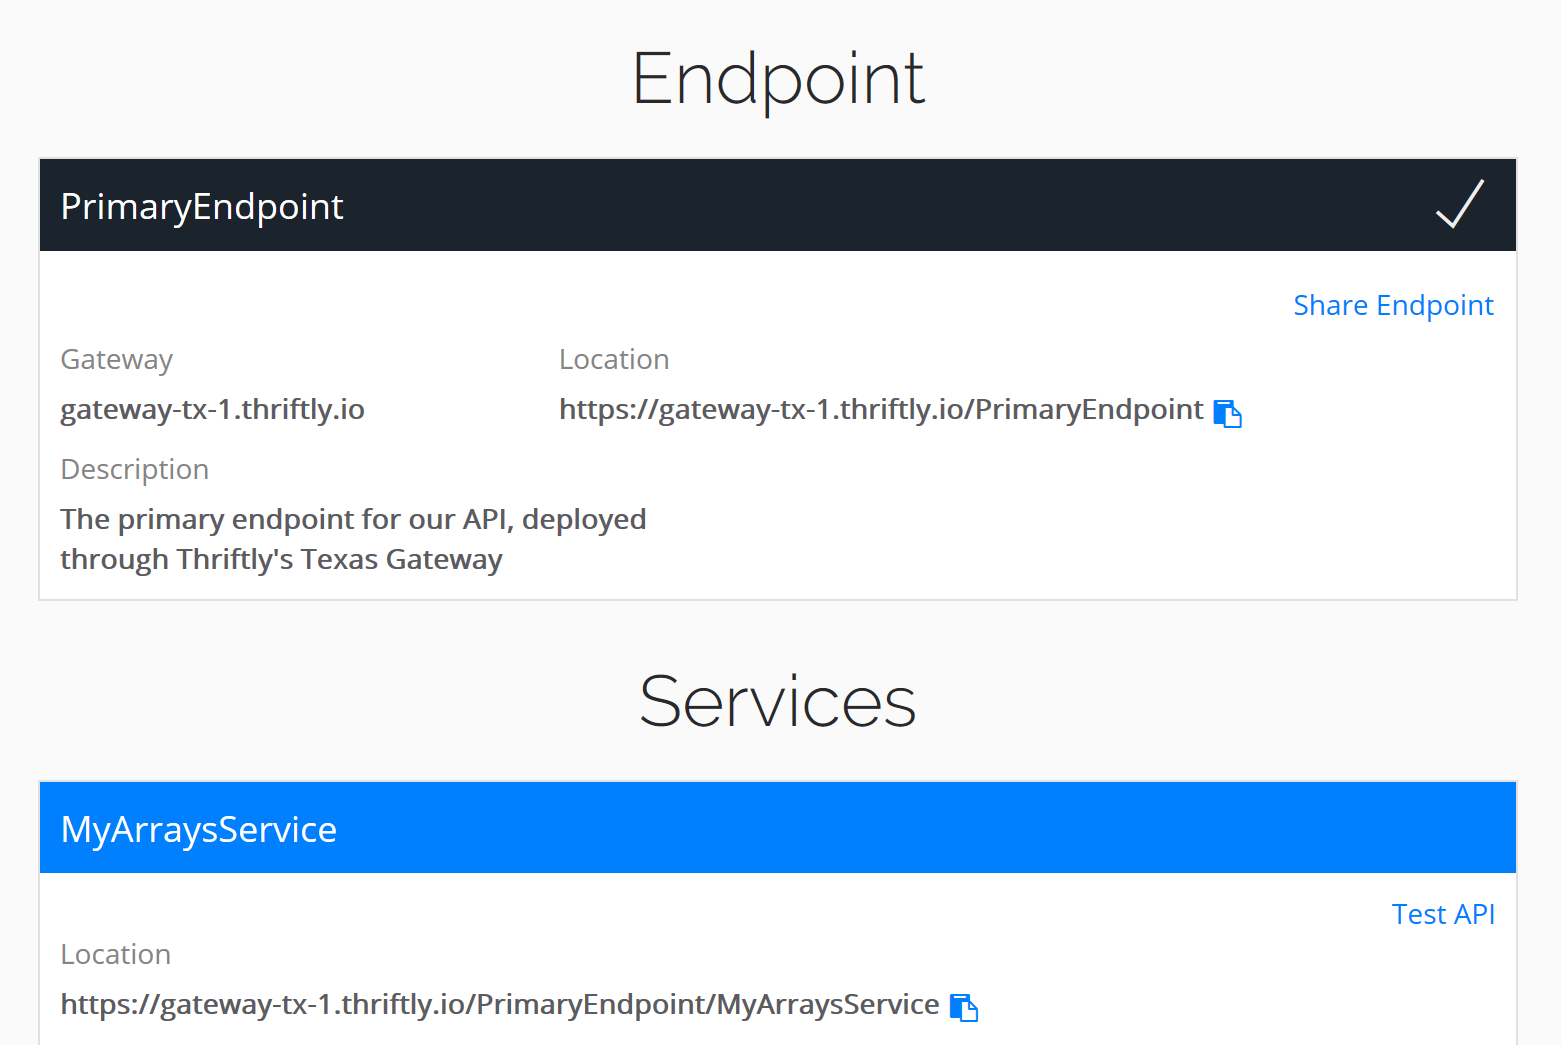 An endpoint information web page